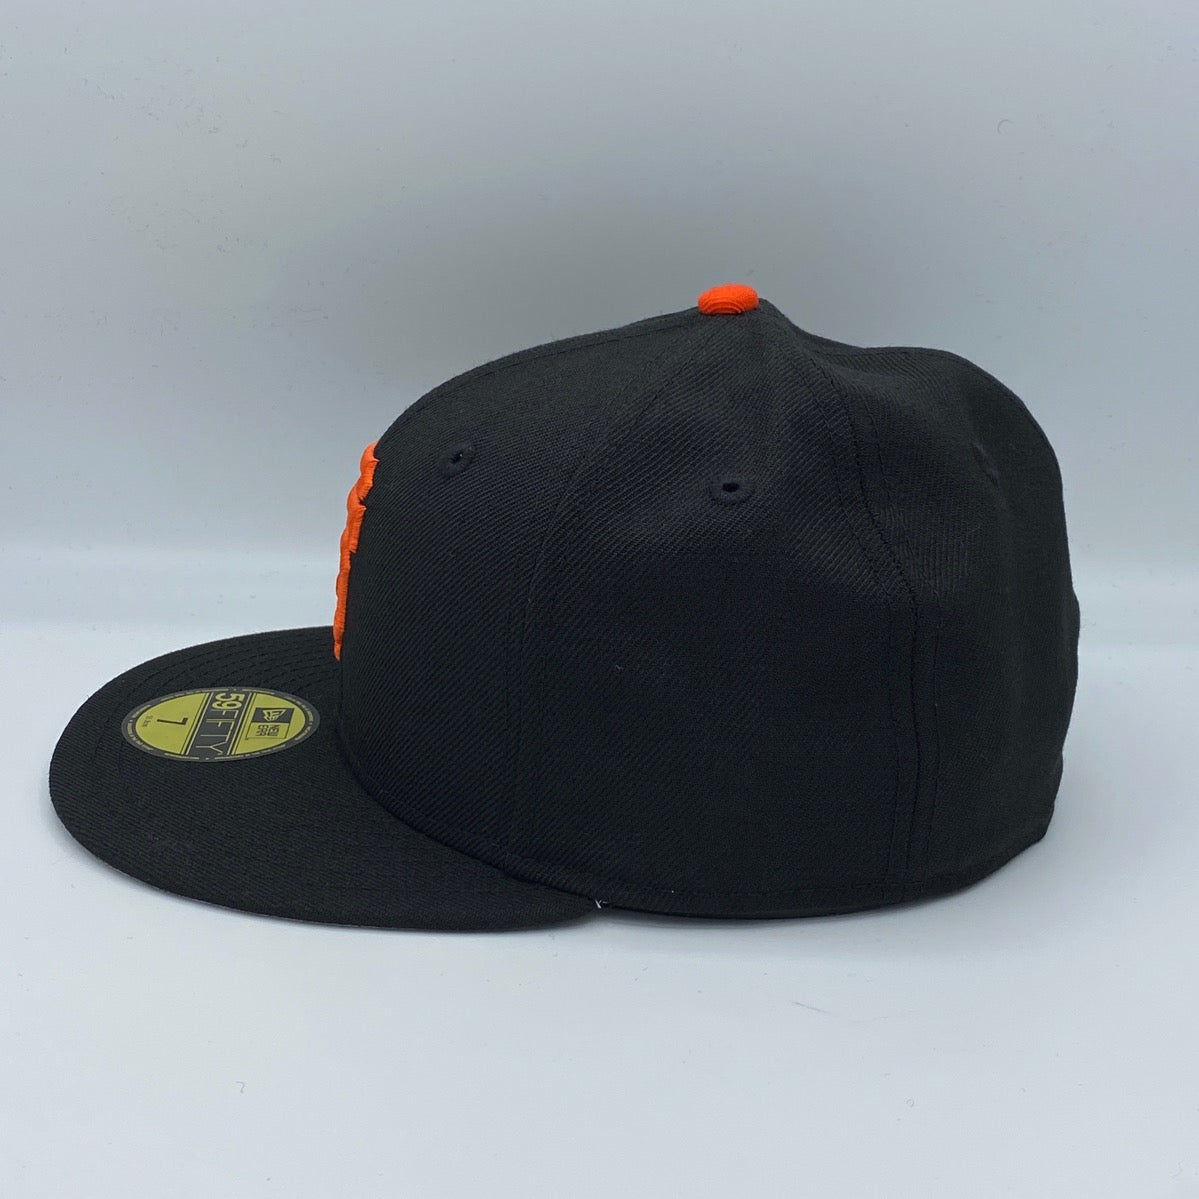 Men's New Era Black San Francisco Giants 25th Anniversary Spring Training Botanical 59FIFTY Fitted Hat